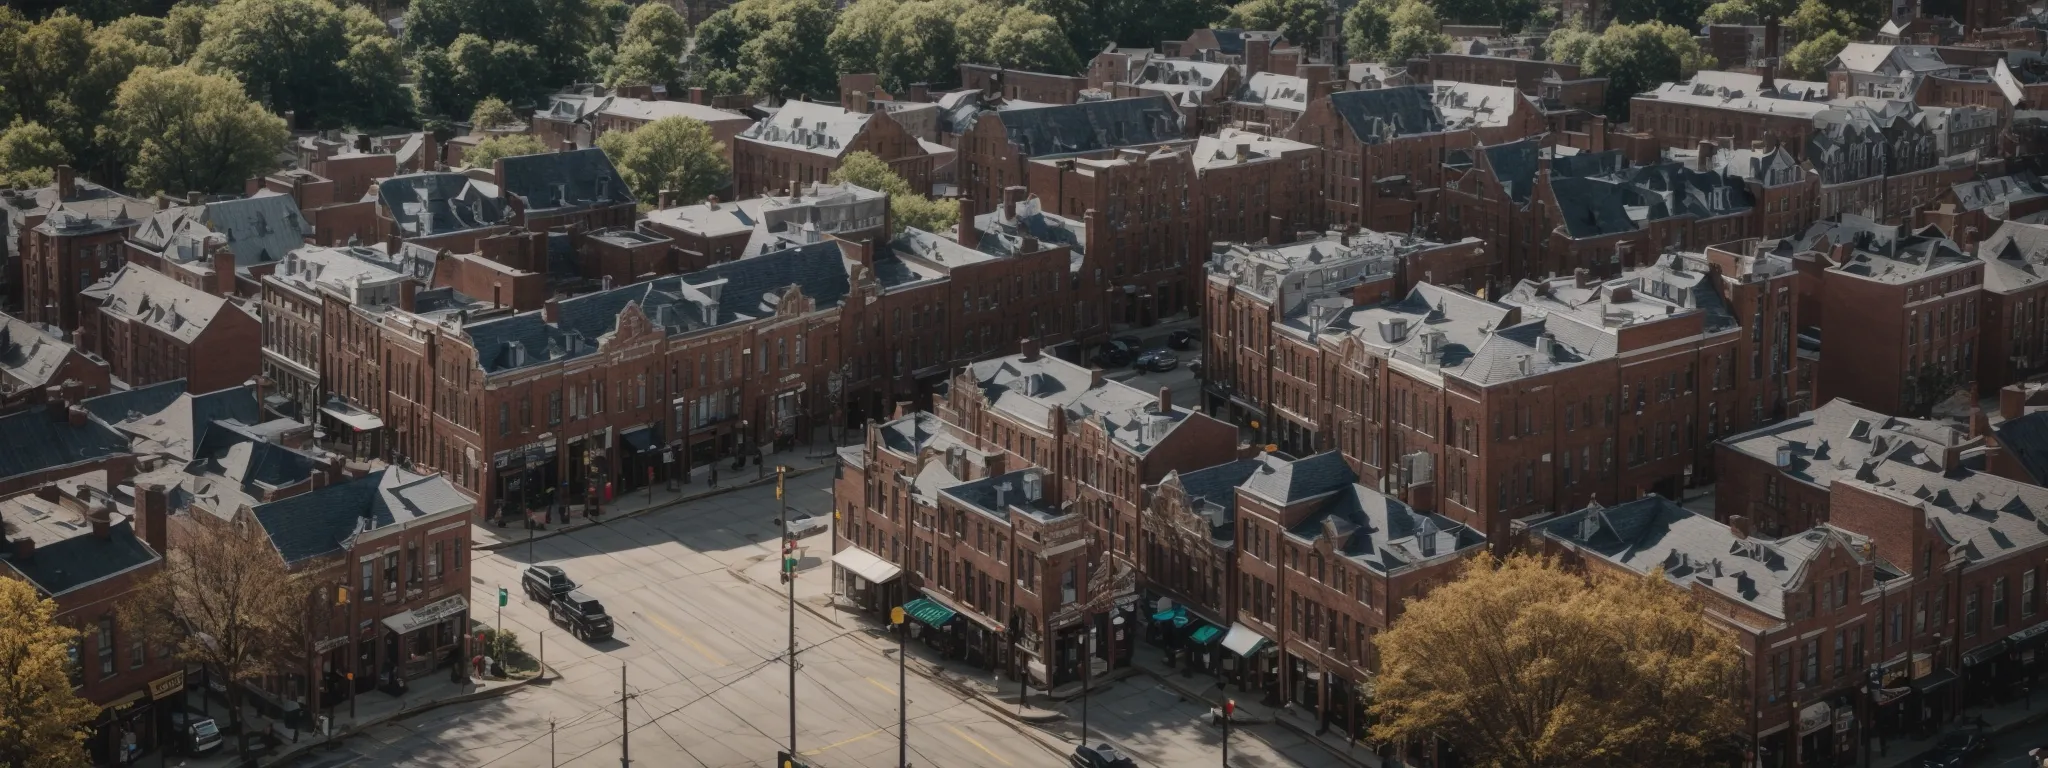 a birds-eye view of the historic buildings in downtown york, pennsylvania, symbolizing local community interconnectedness.